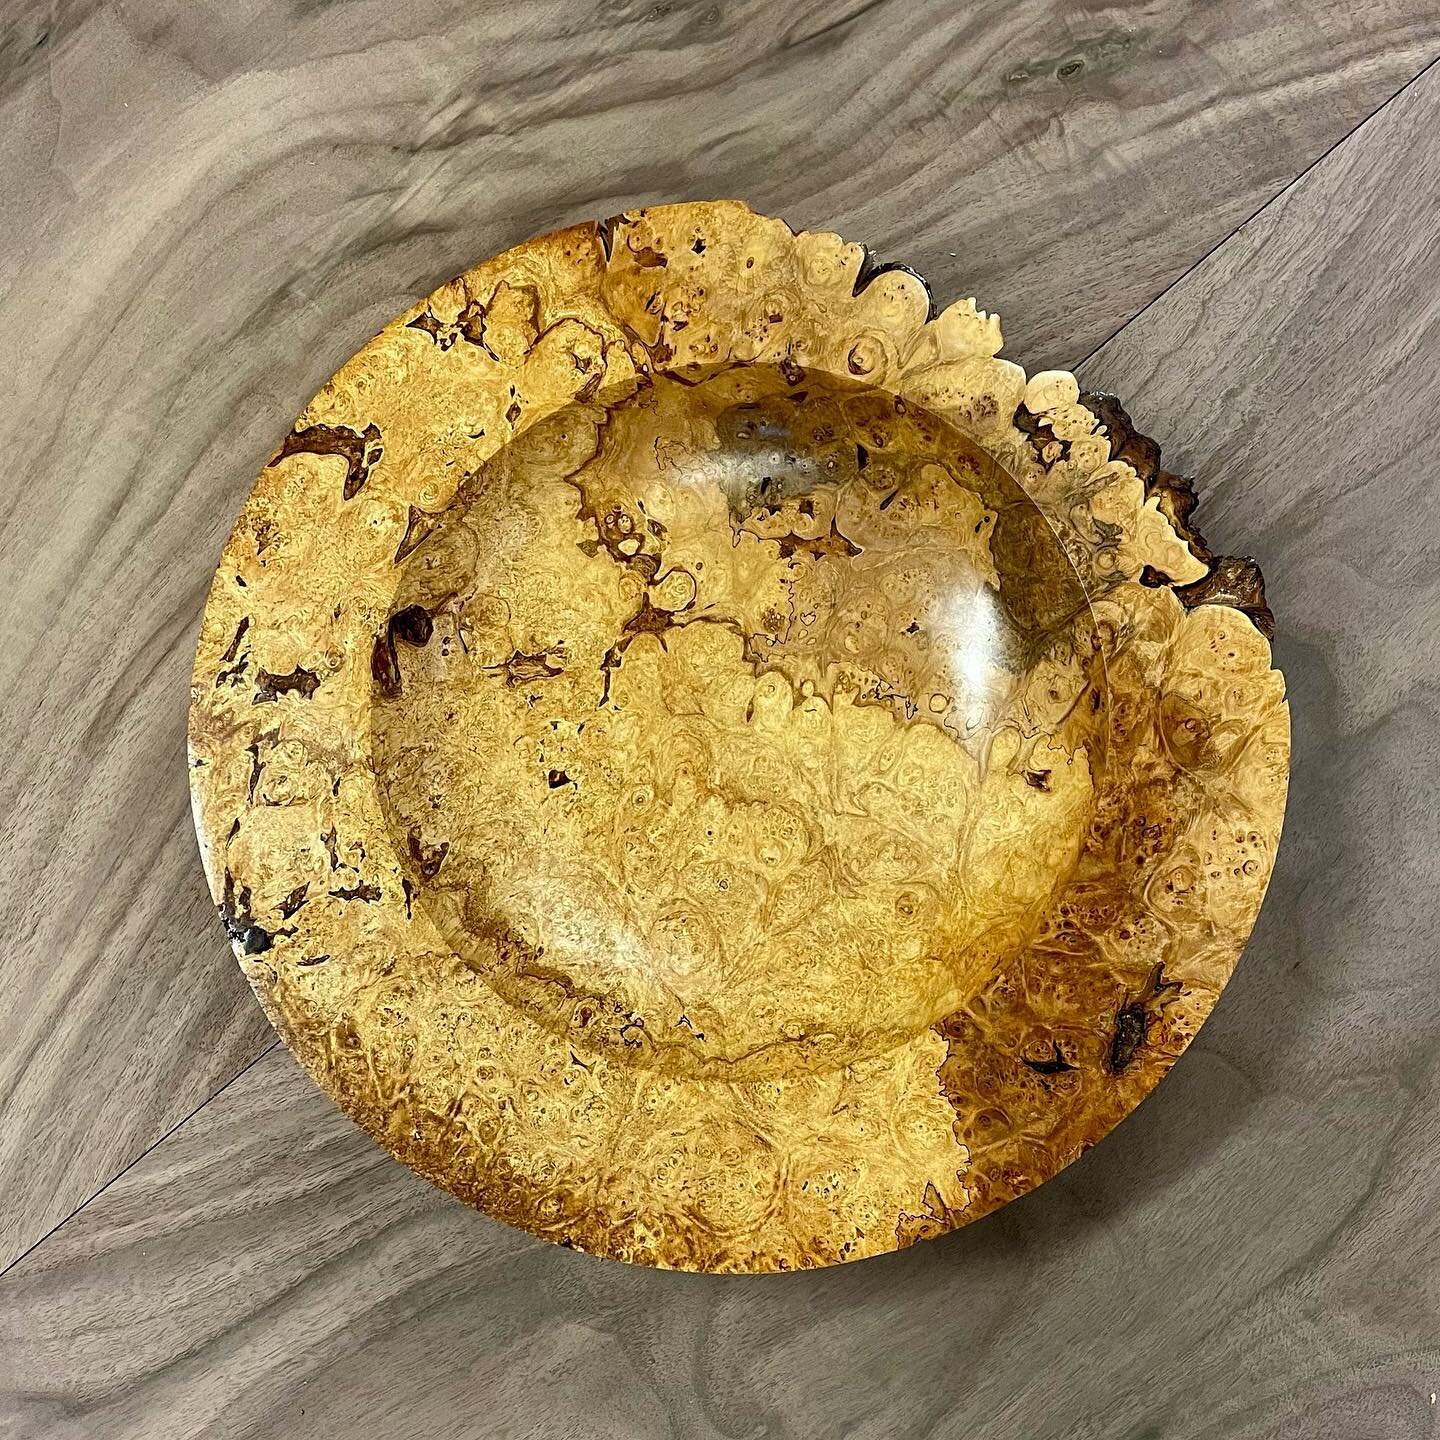 Burl art reveals the complexity and warmth of wood and is inspired by the natural beauty of Muskoka. 

Big Leaf Maple Burl Bowl 15&rdquo; round x 3&rdquo; high

#mapleburlbowl #mapleburl #naturalart #muskoka #muskokalife #hyygehome #hyygelife #lakeof